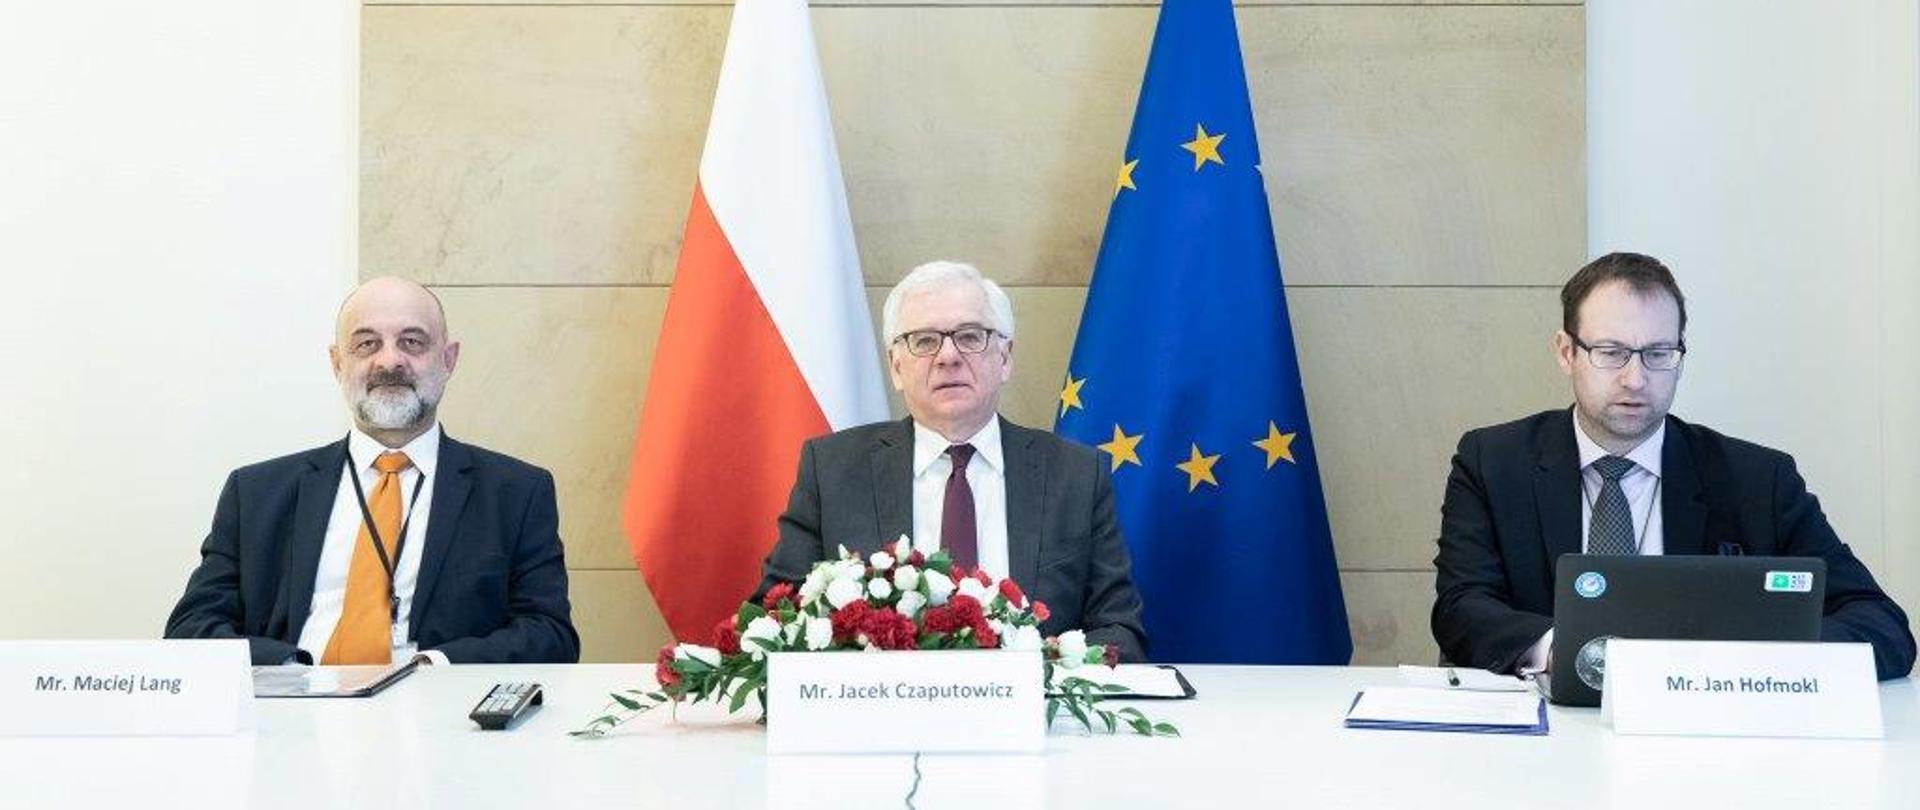 The Visegrad Group ministers video conference 